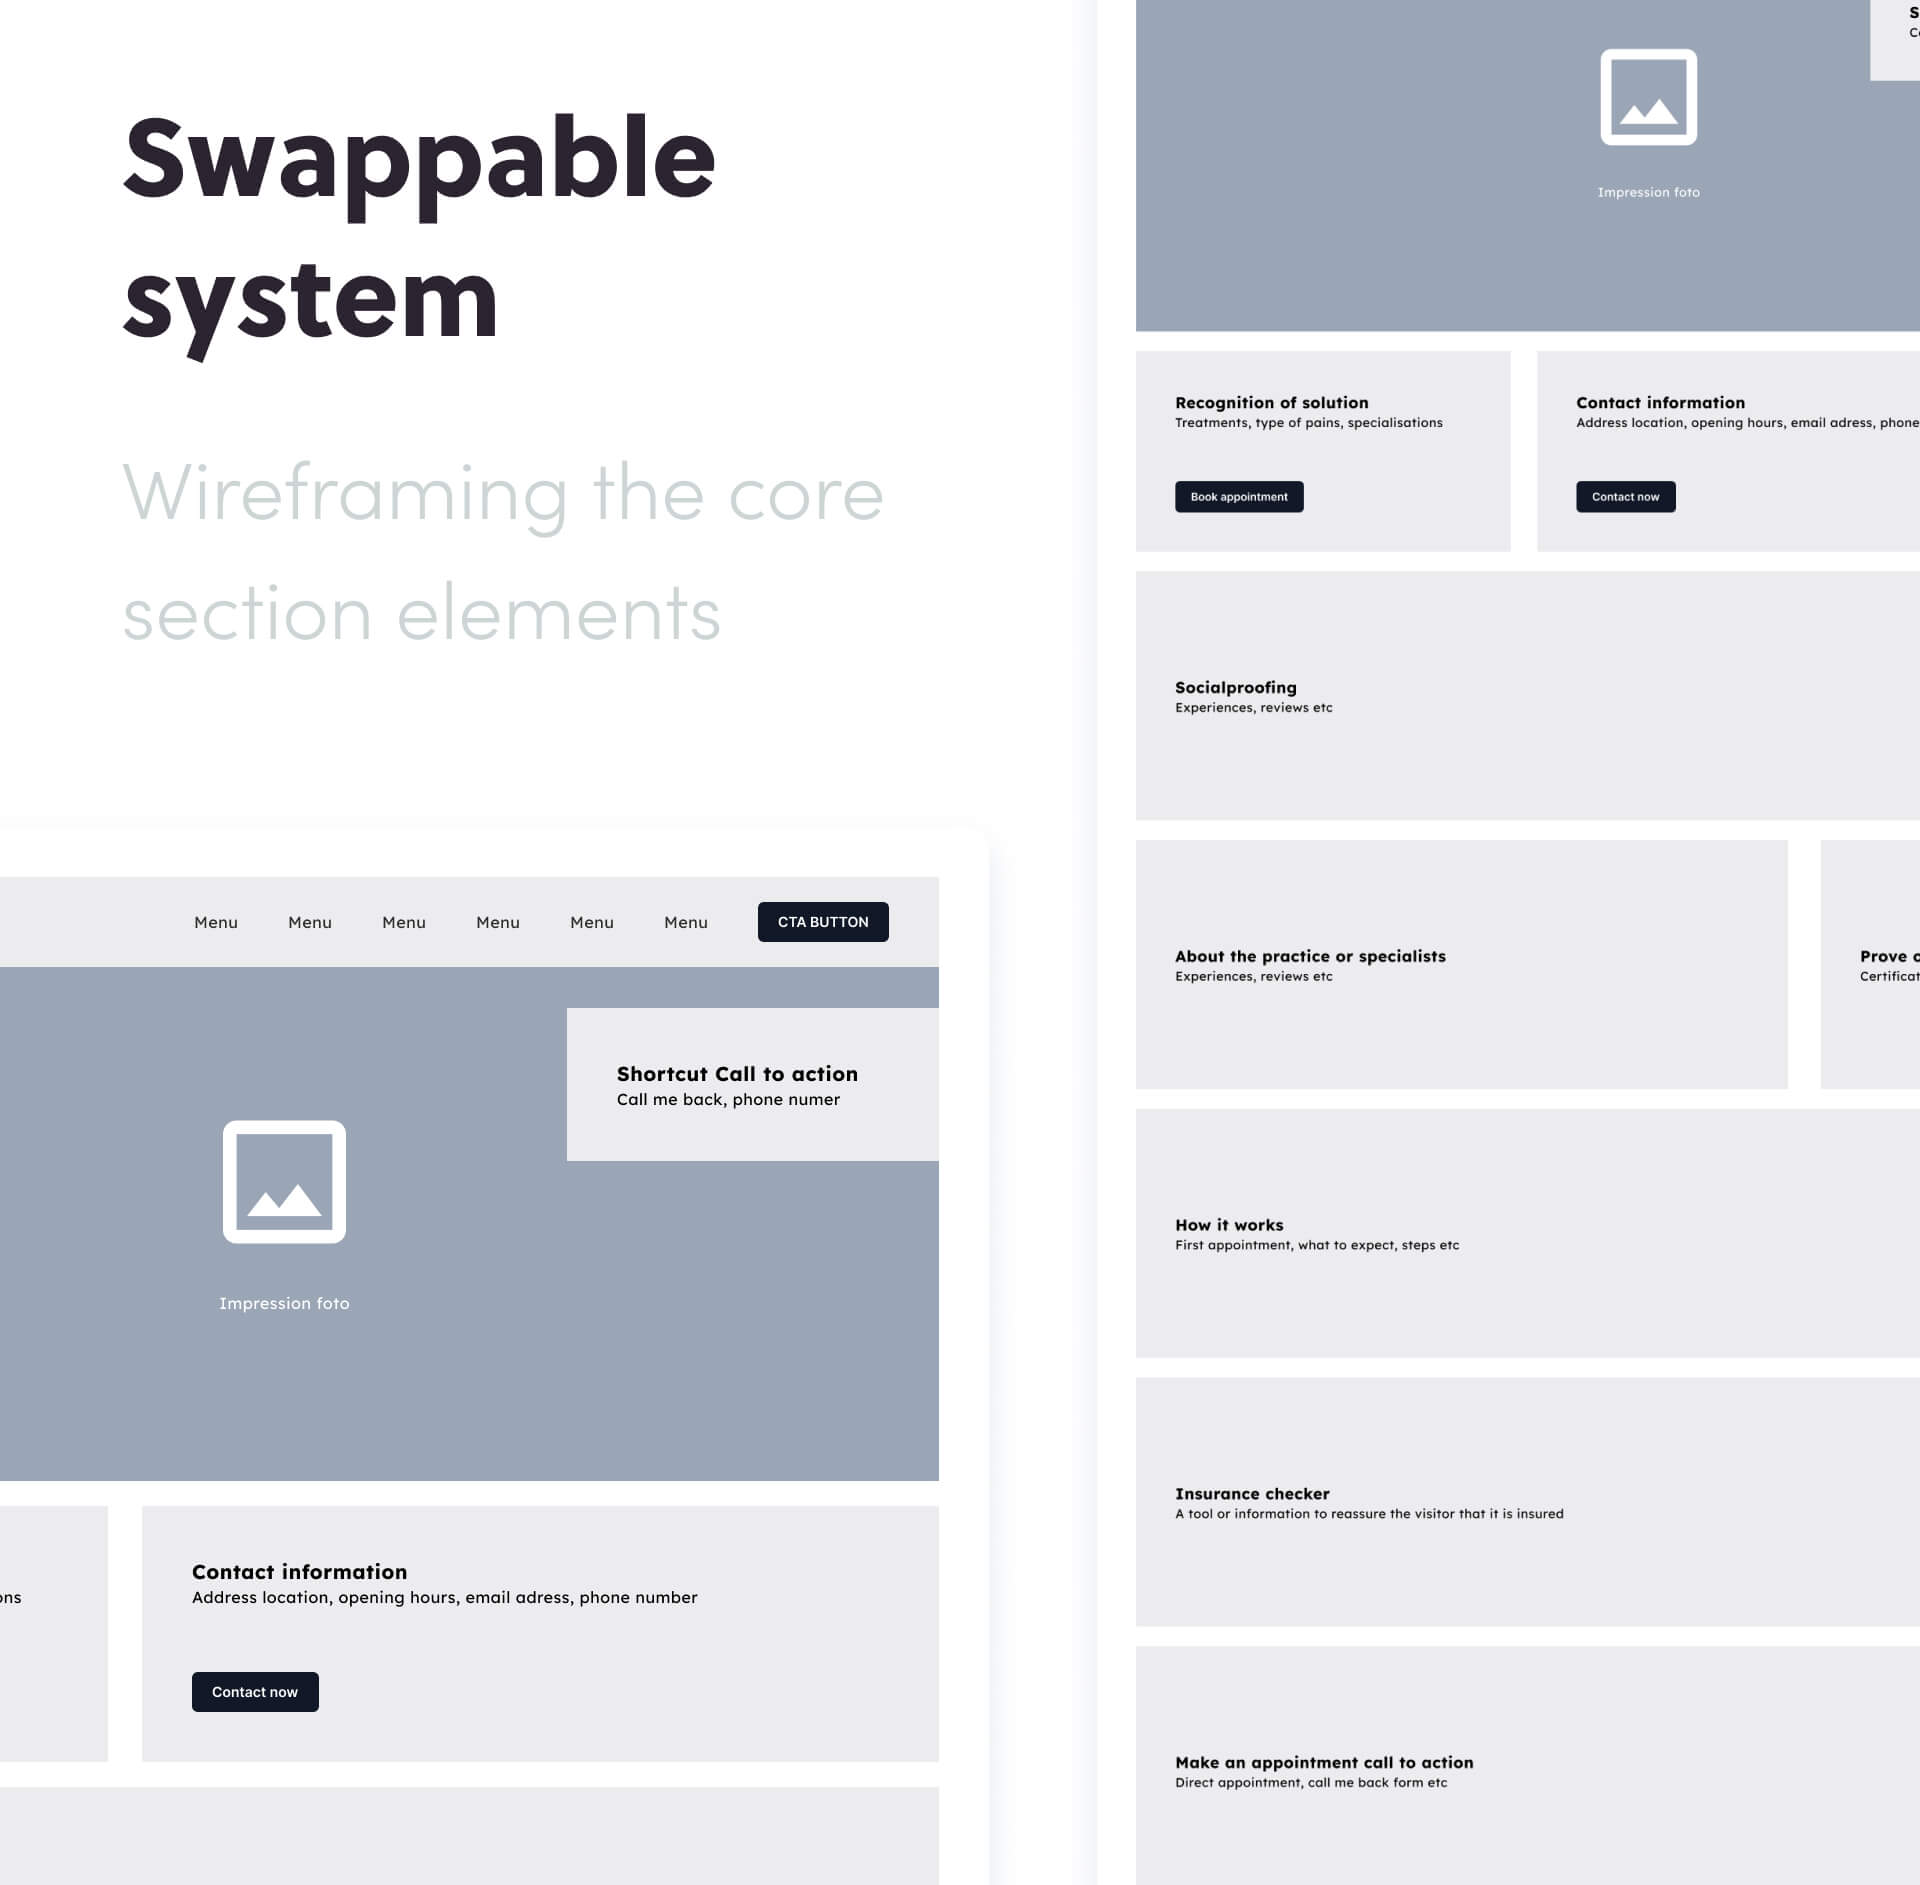 Wireframing concept for a swappable system website layout showing core section elements and call-to-action features.